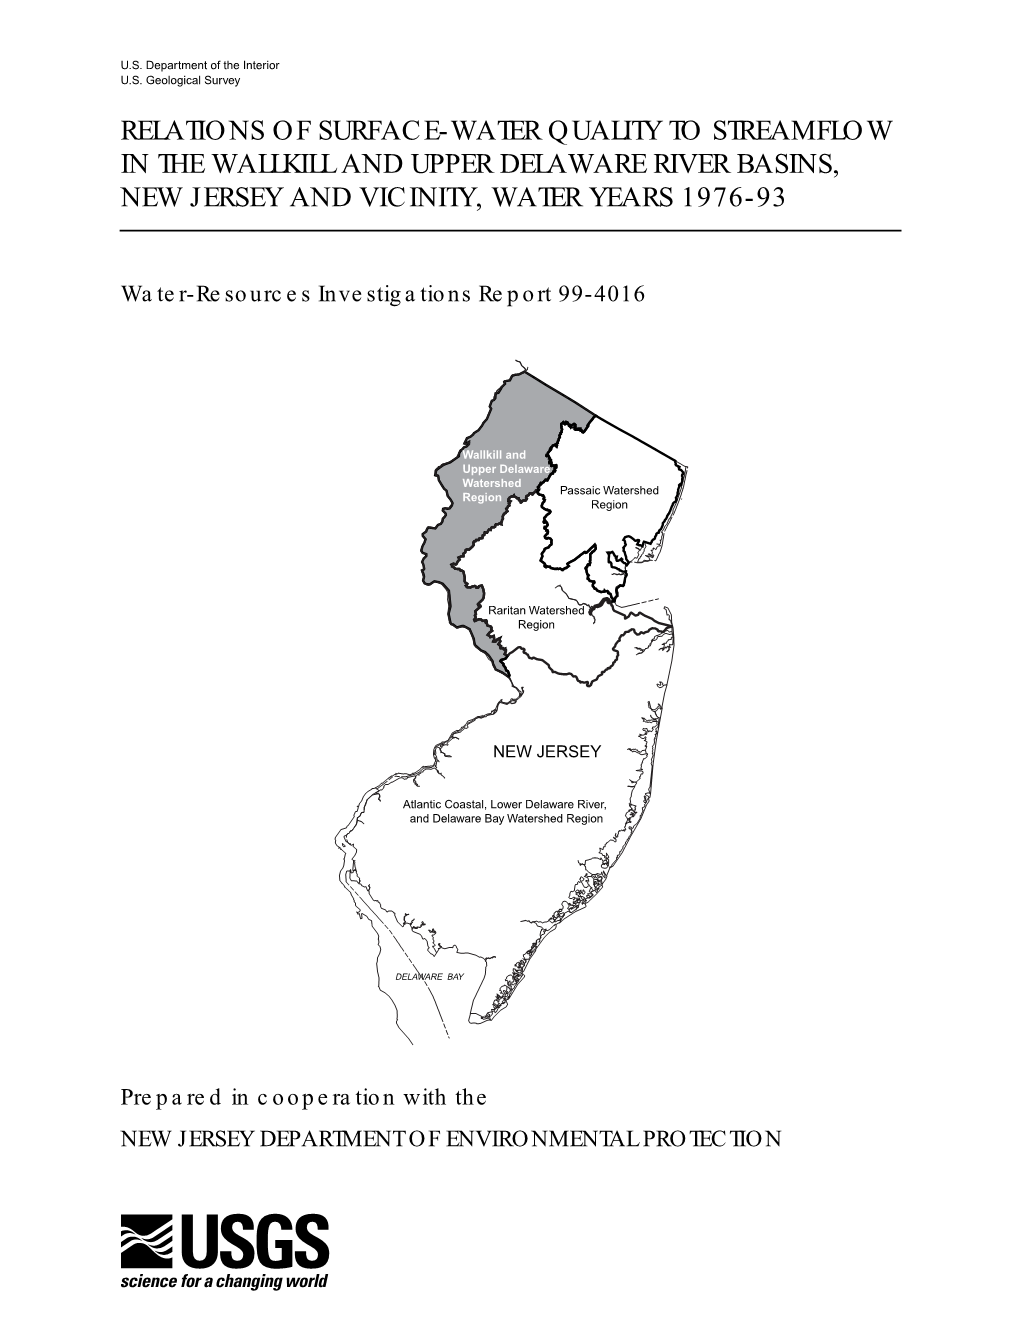 Relations of Surface-Water Quality to Streamflow in the Wallkill and Upper Delaware River Basins, New Jersey and Vicinity, Water Years 1976-93